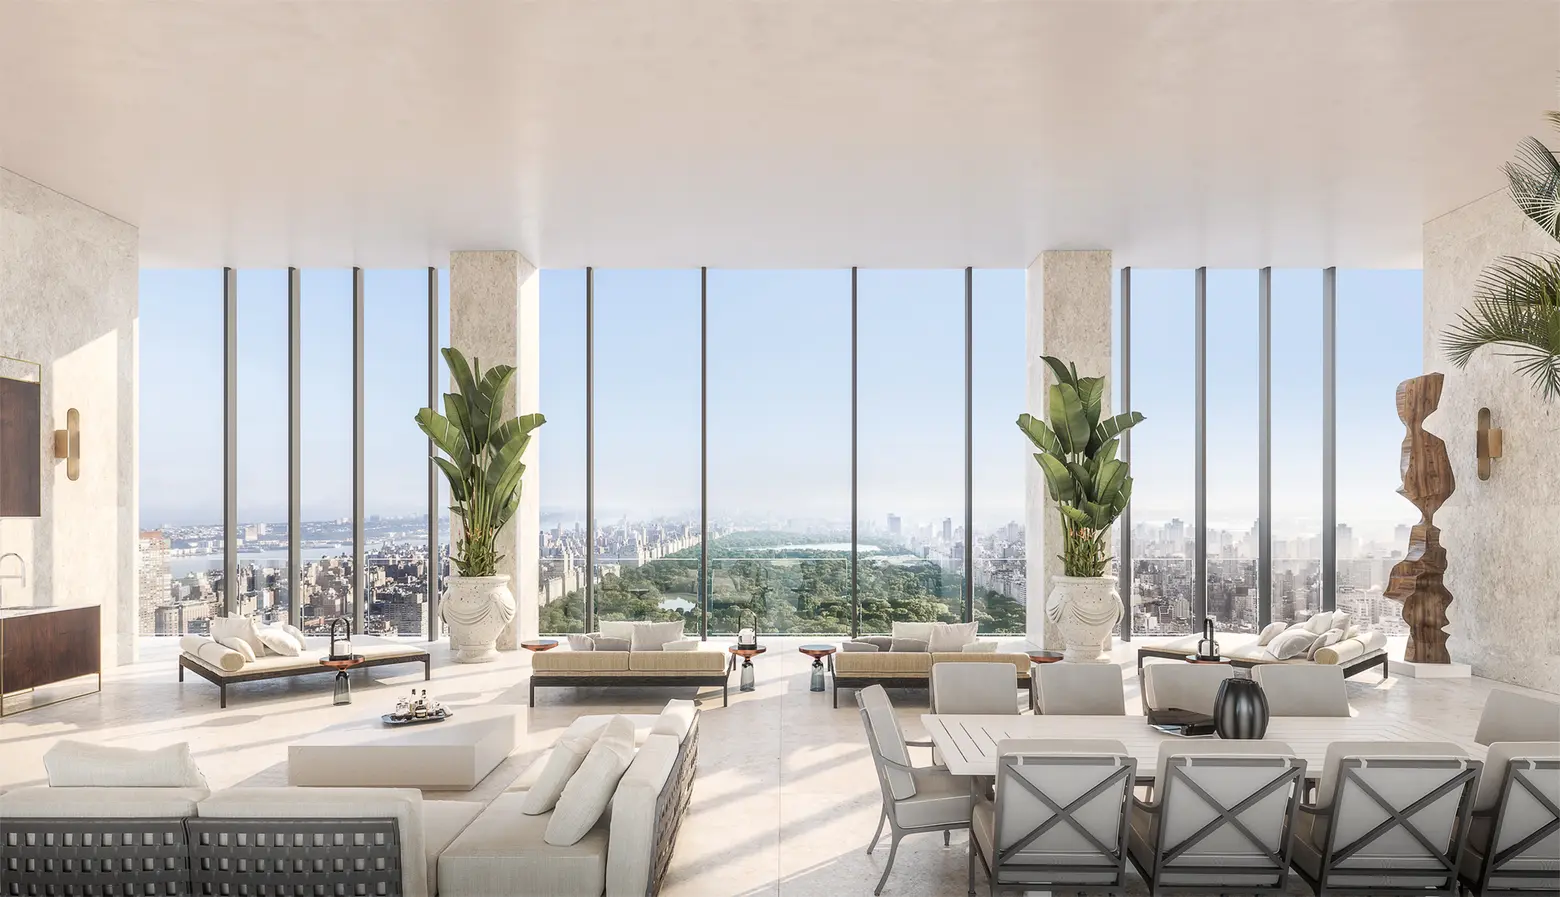 $66M triplex penthouse at 111 West 57th Street sits 900 feet above Central Park